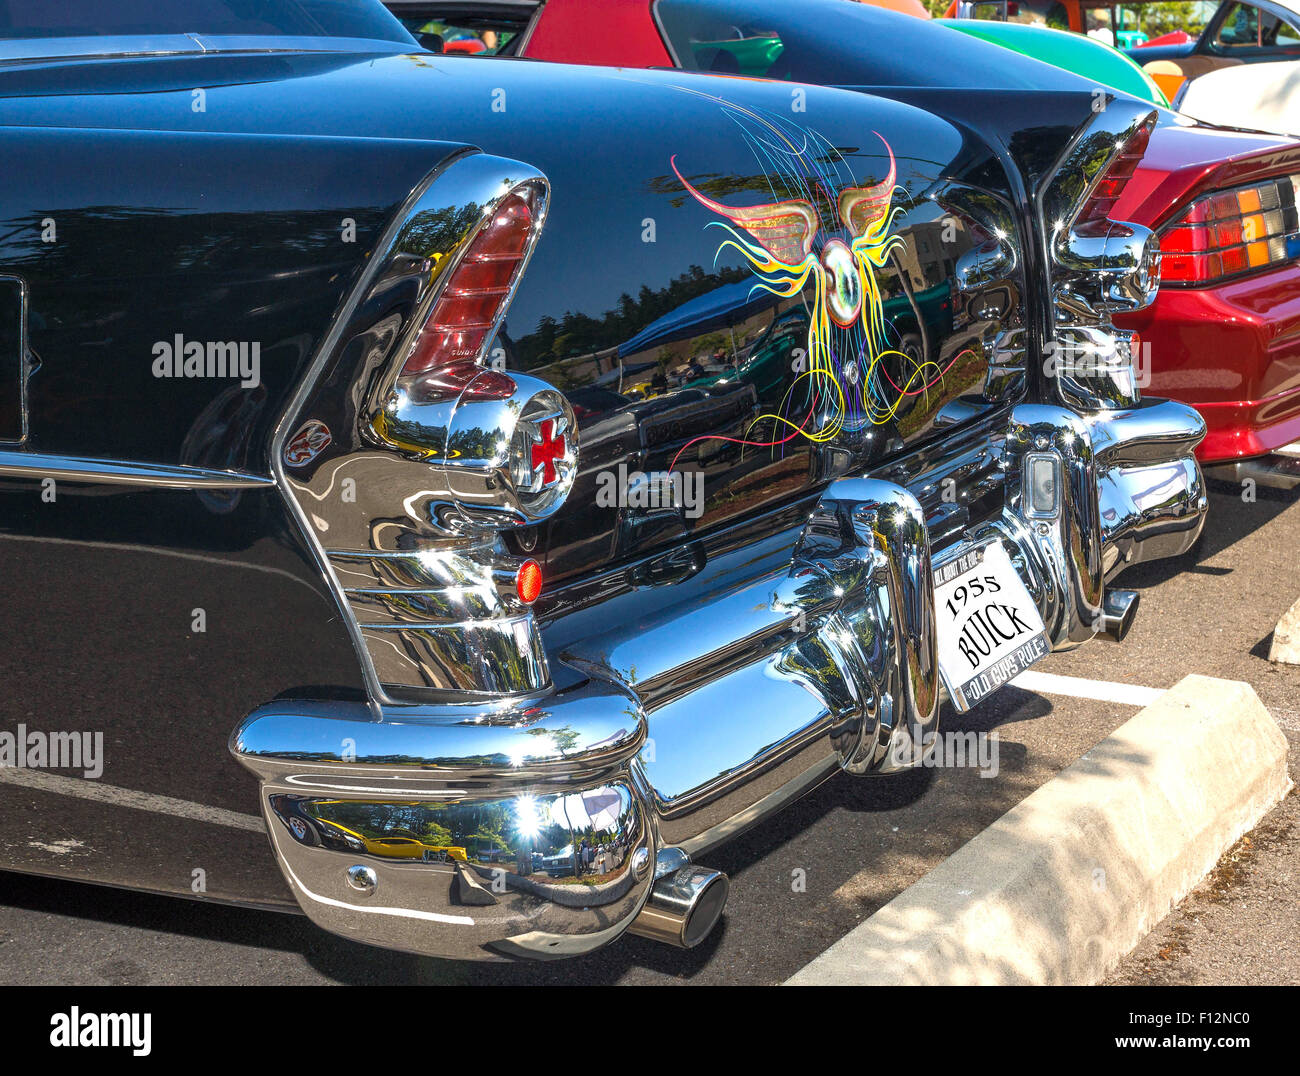 Rear view of a 1955 restored and customized Buick at a August, 2014 classic car show in Washington, State. Stock Photo